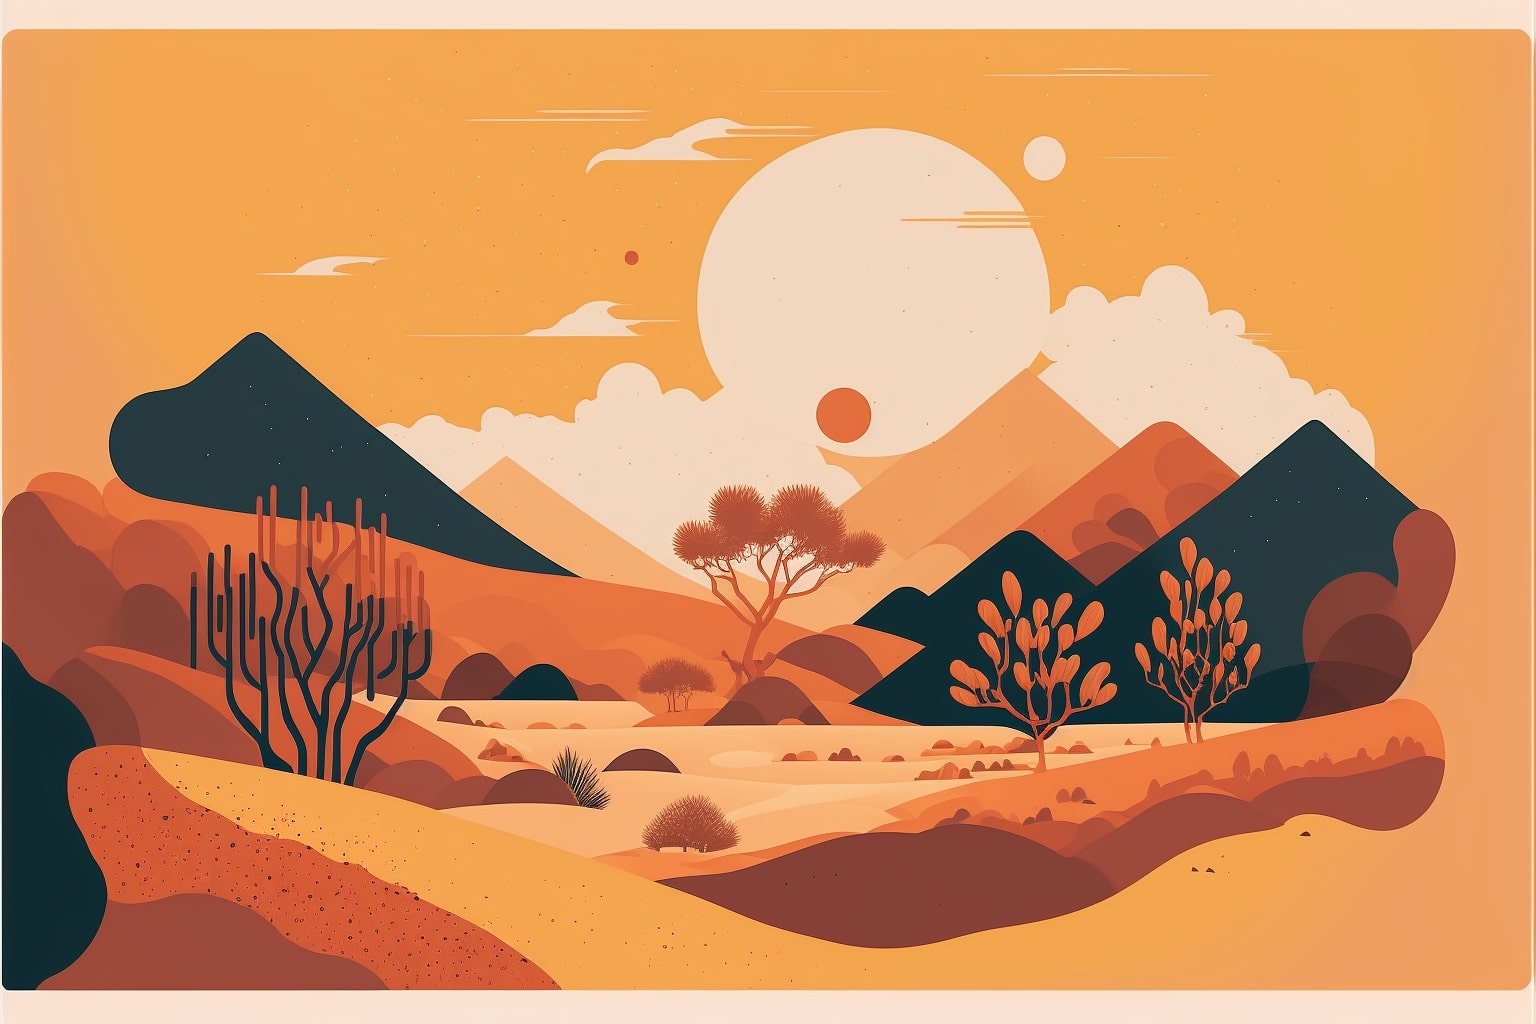 Desert scene with trees and mountains in the background.